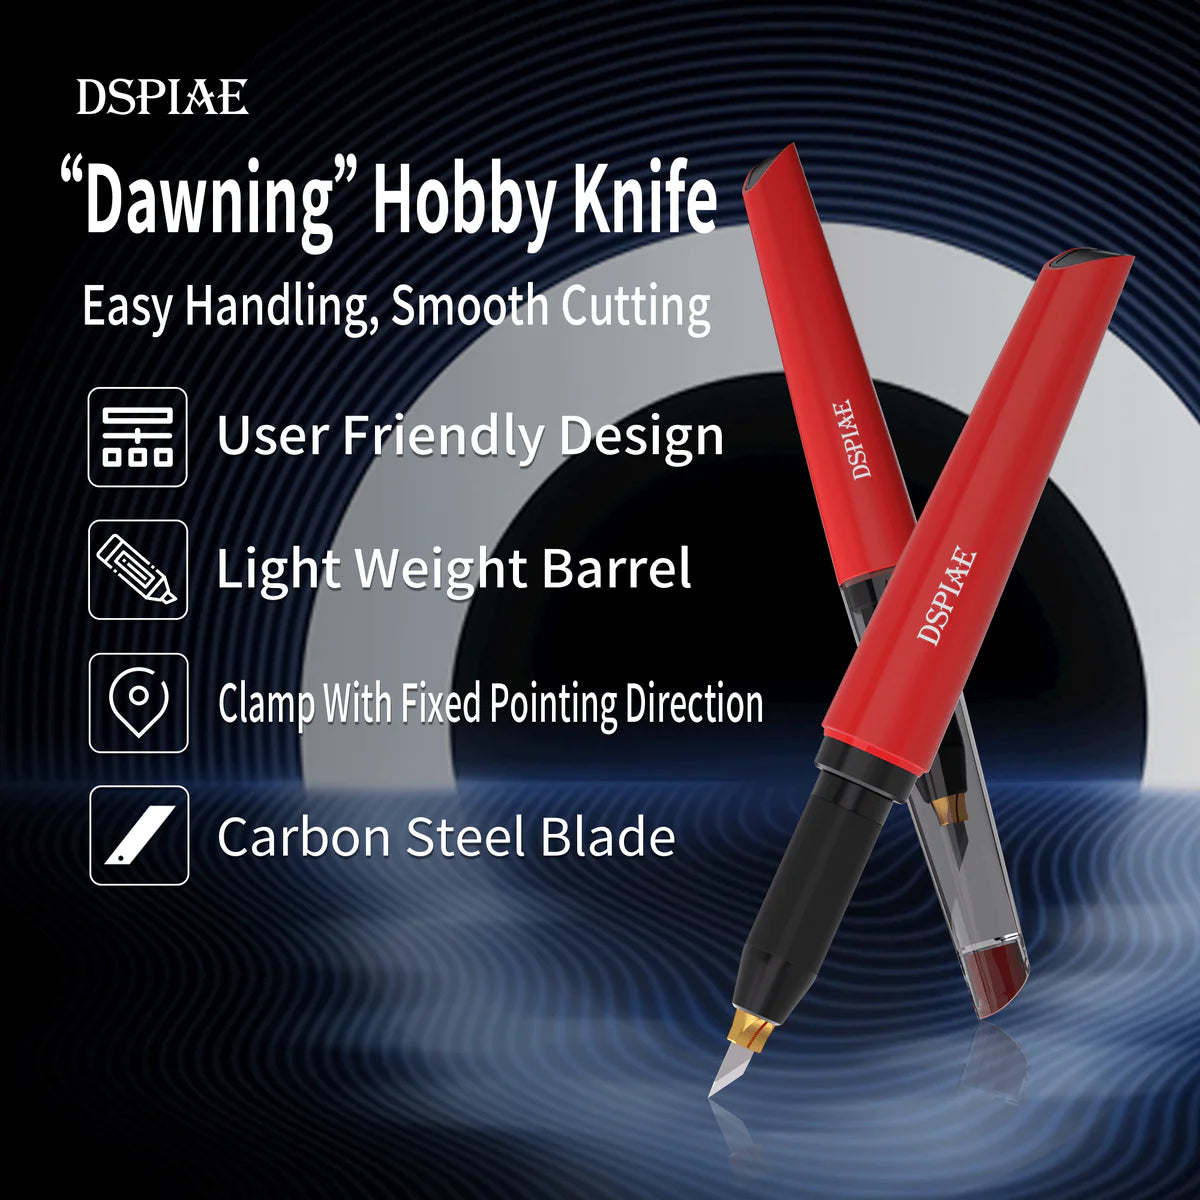 Dspiae Drawing Hobby Knife Set